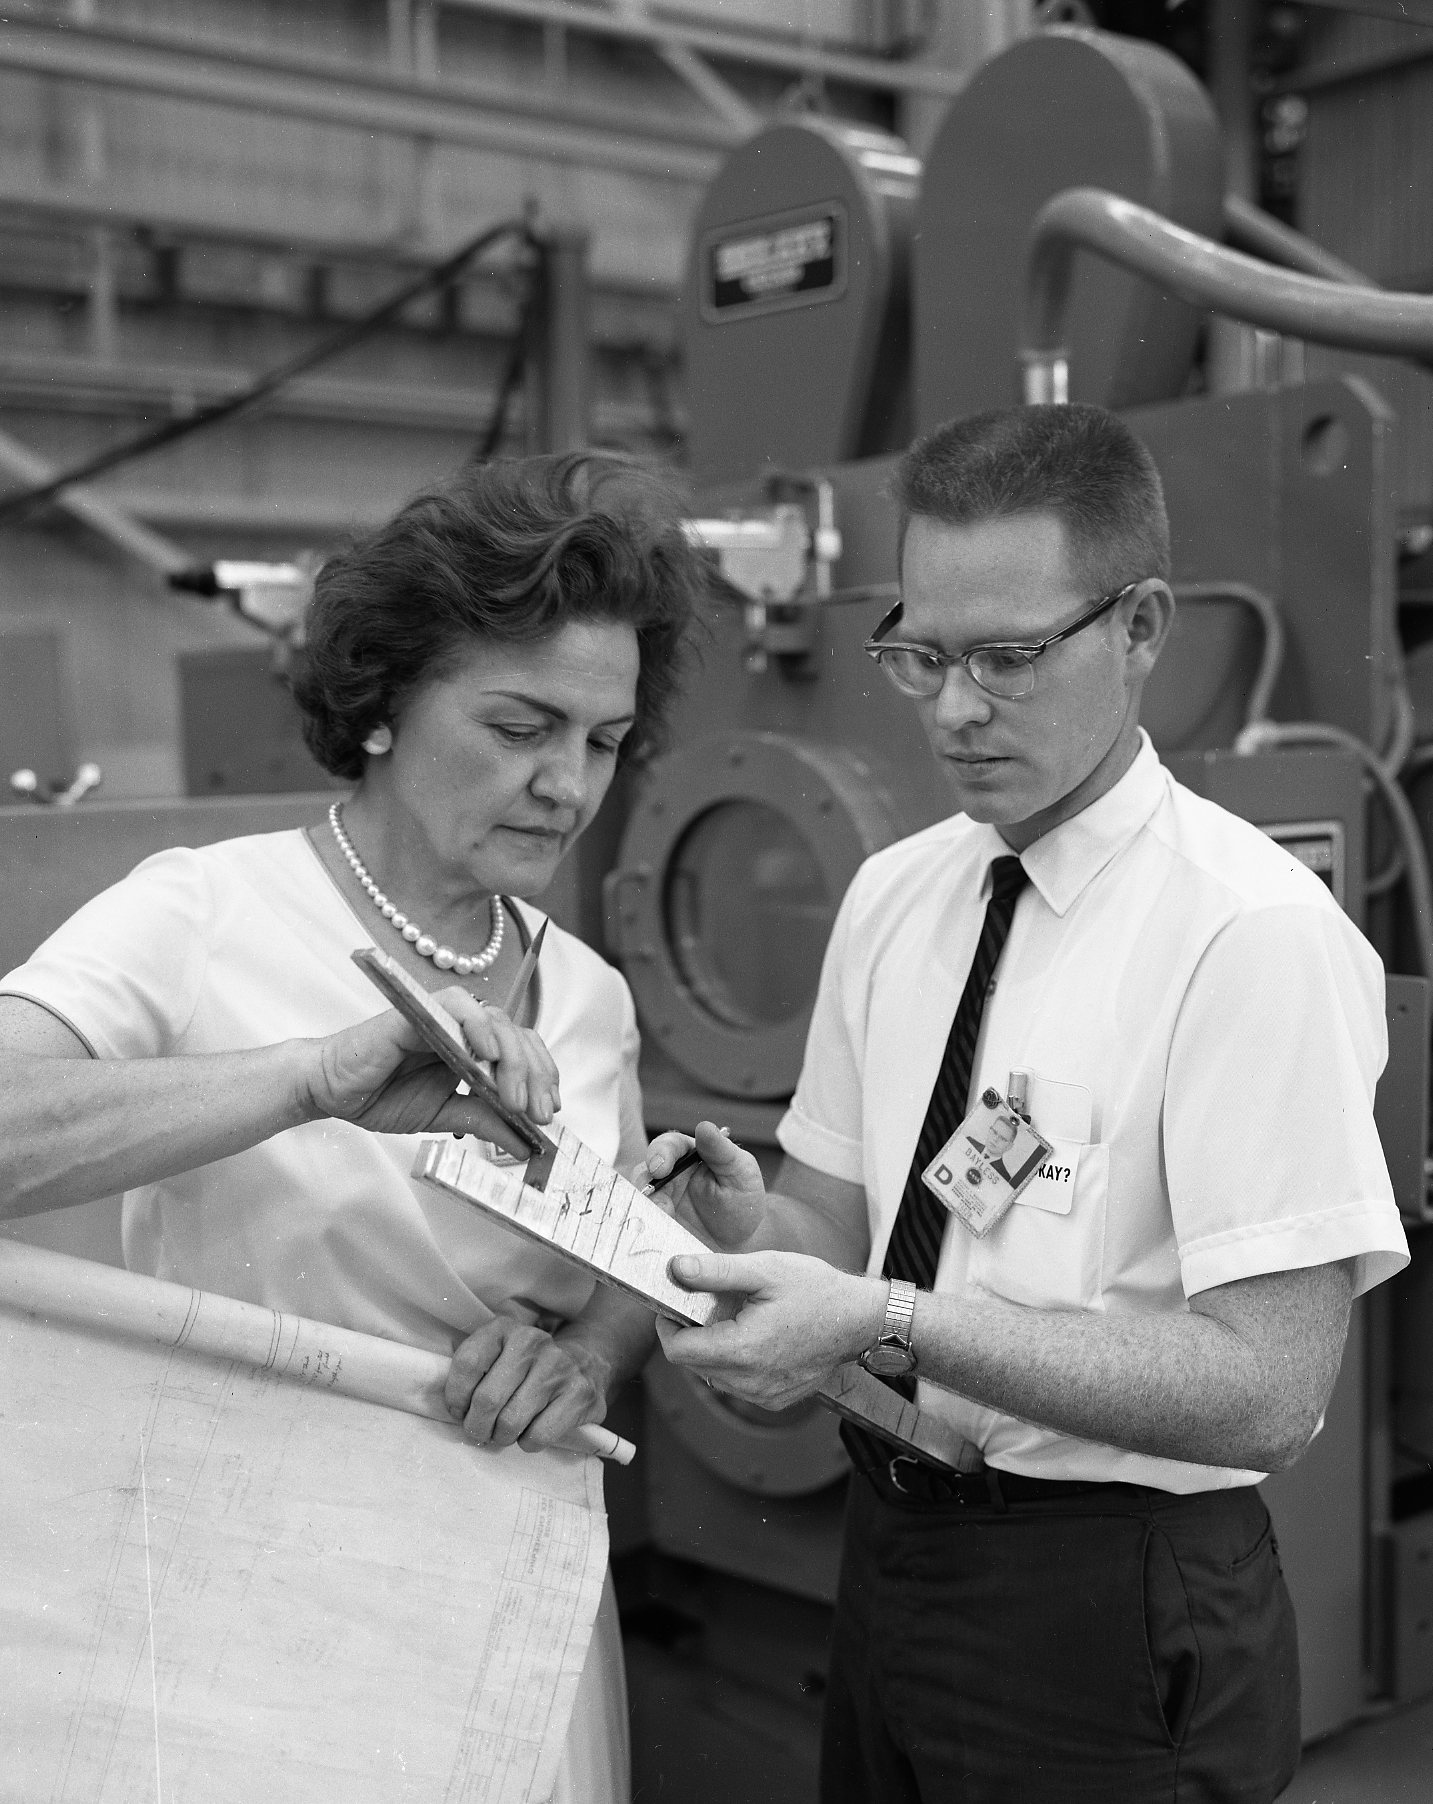 Margaret “Hap” Brennecke: The woman who welded Apollo's rockets | Astronomy.com